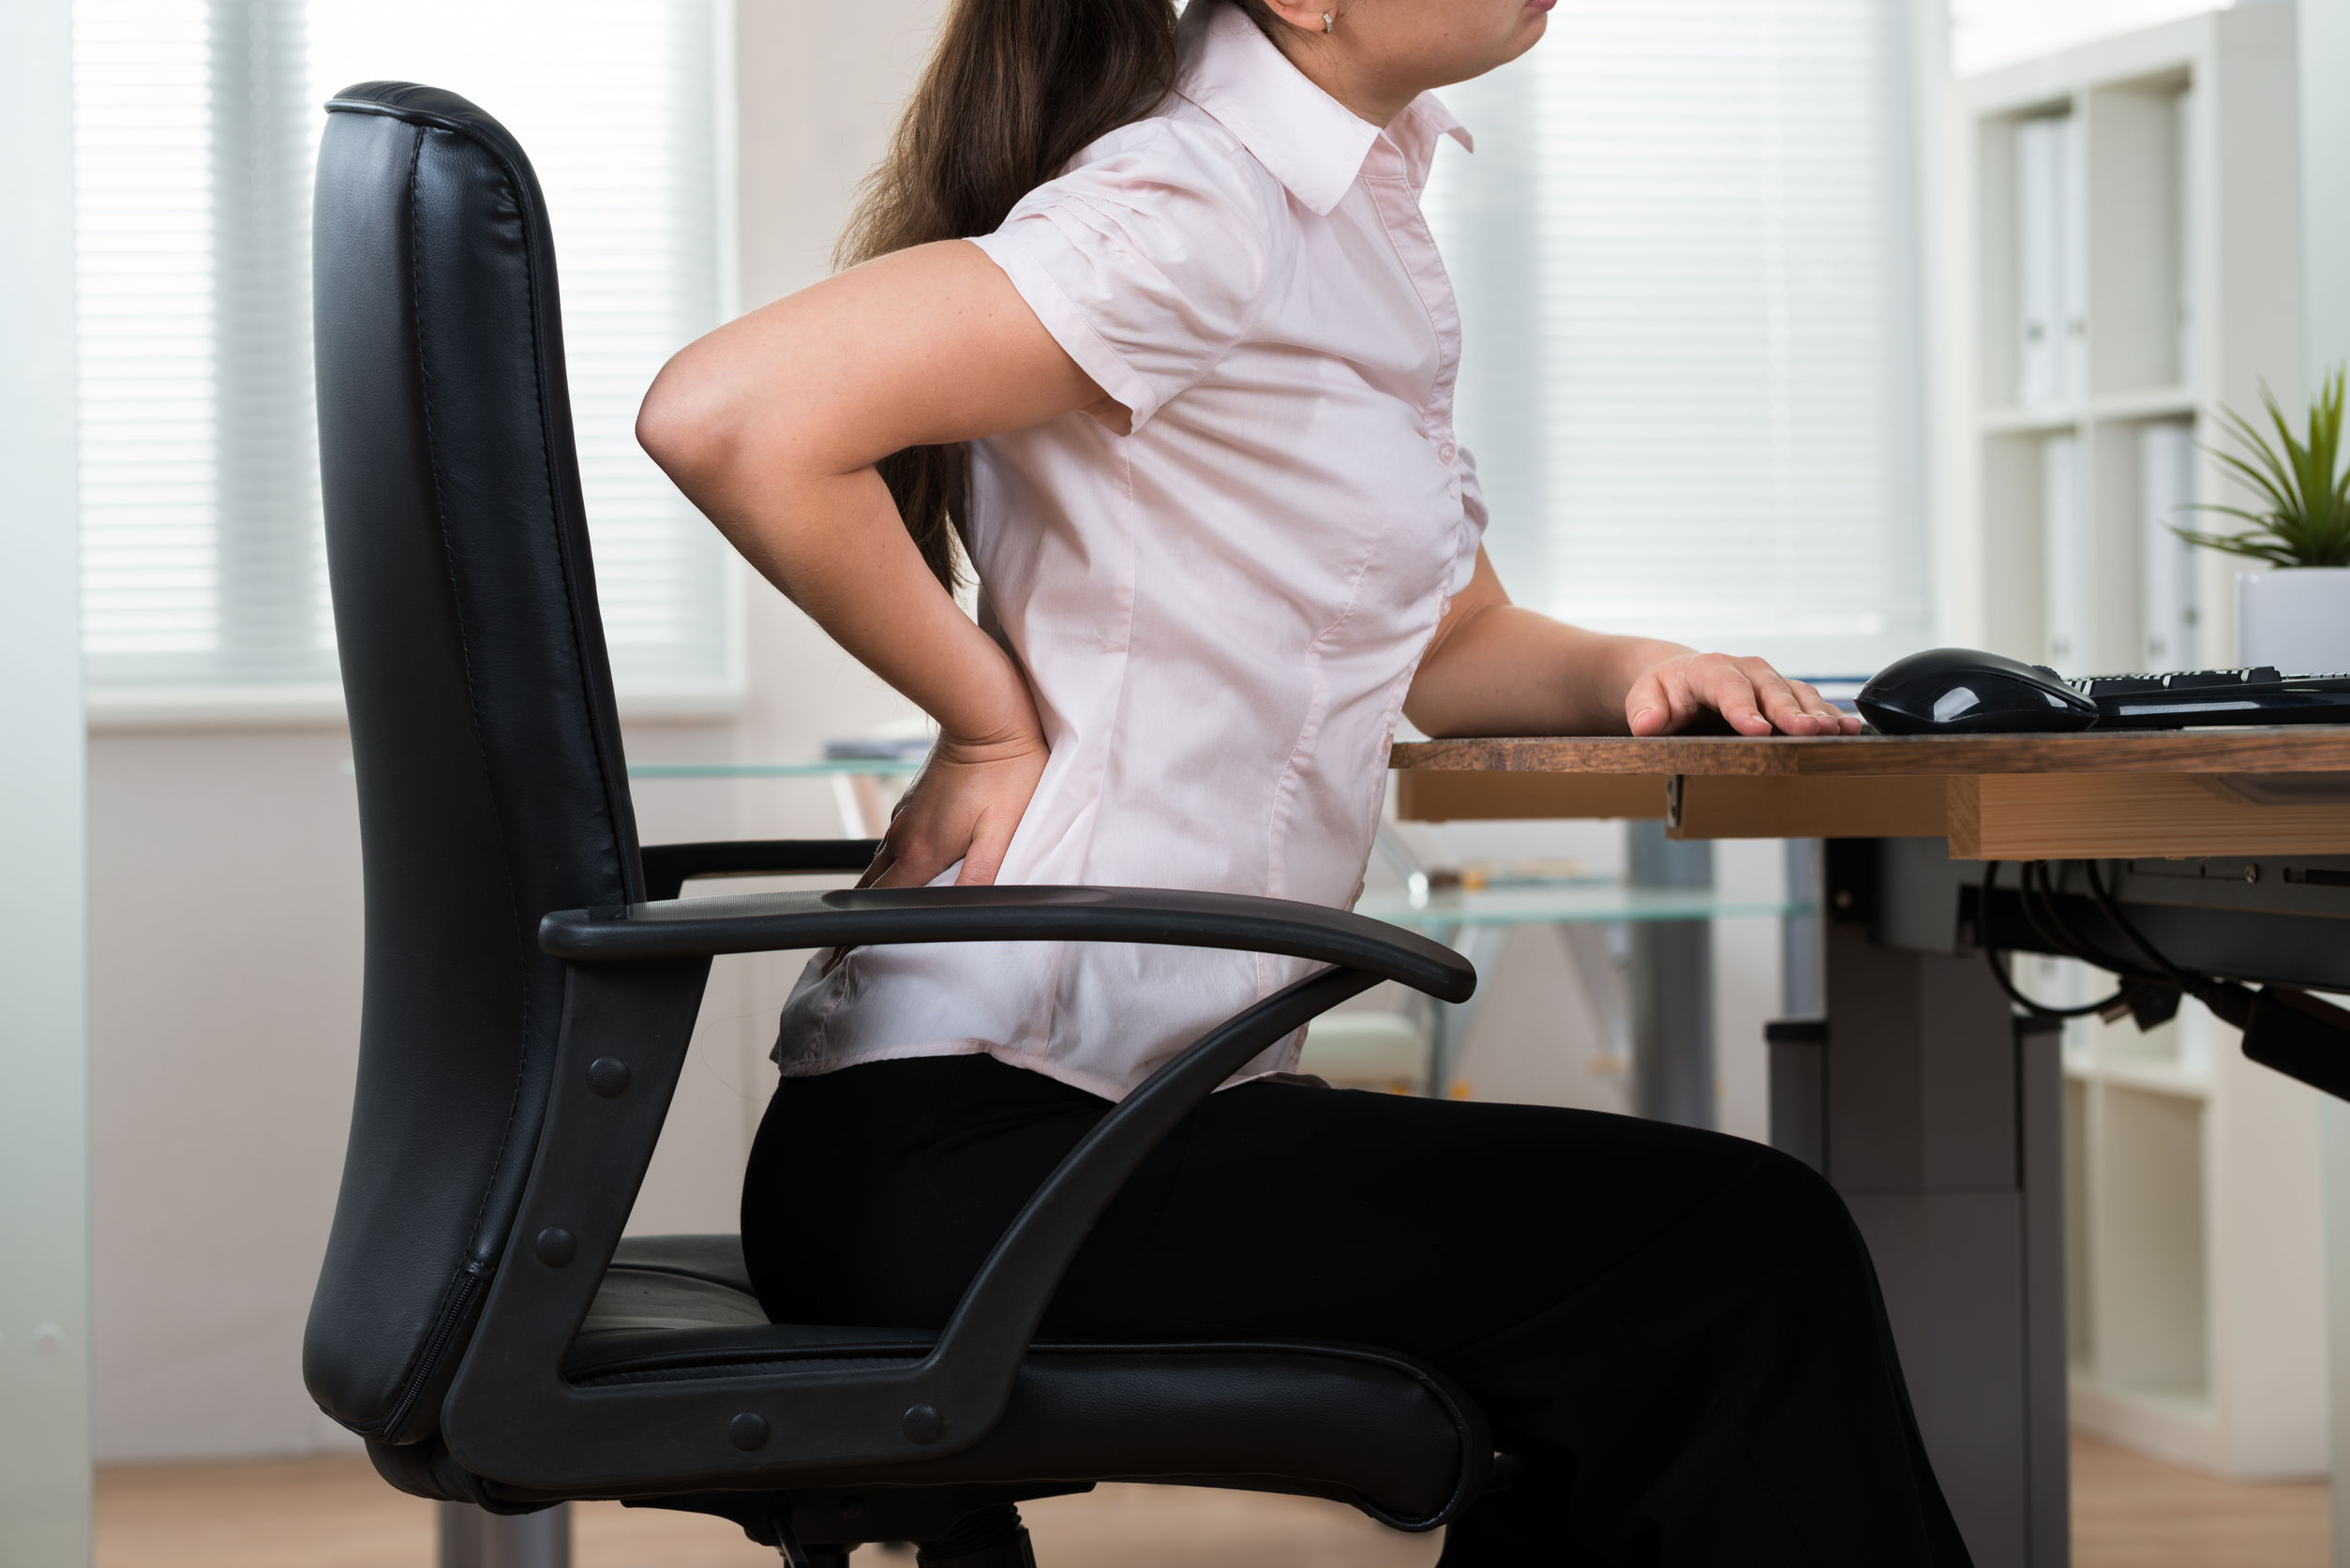 Poor posture hurts your health more than you realize: Tips for fixing it